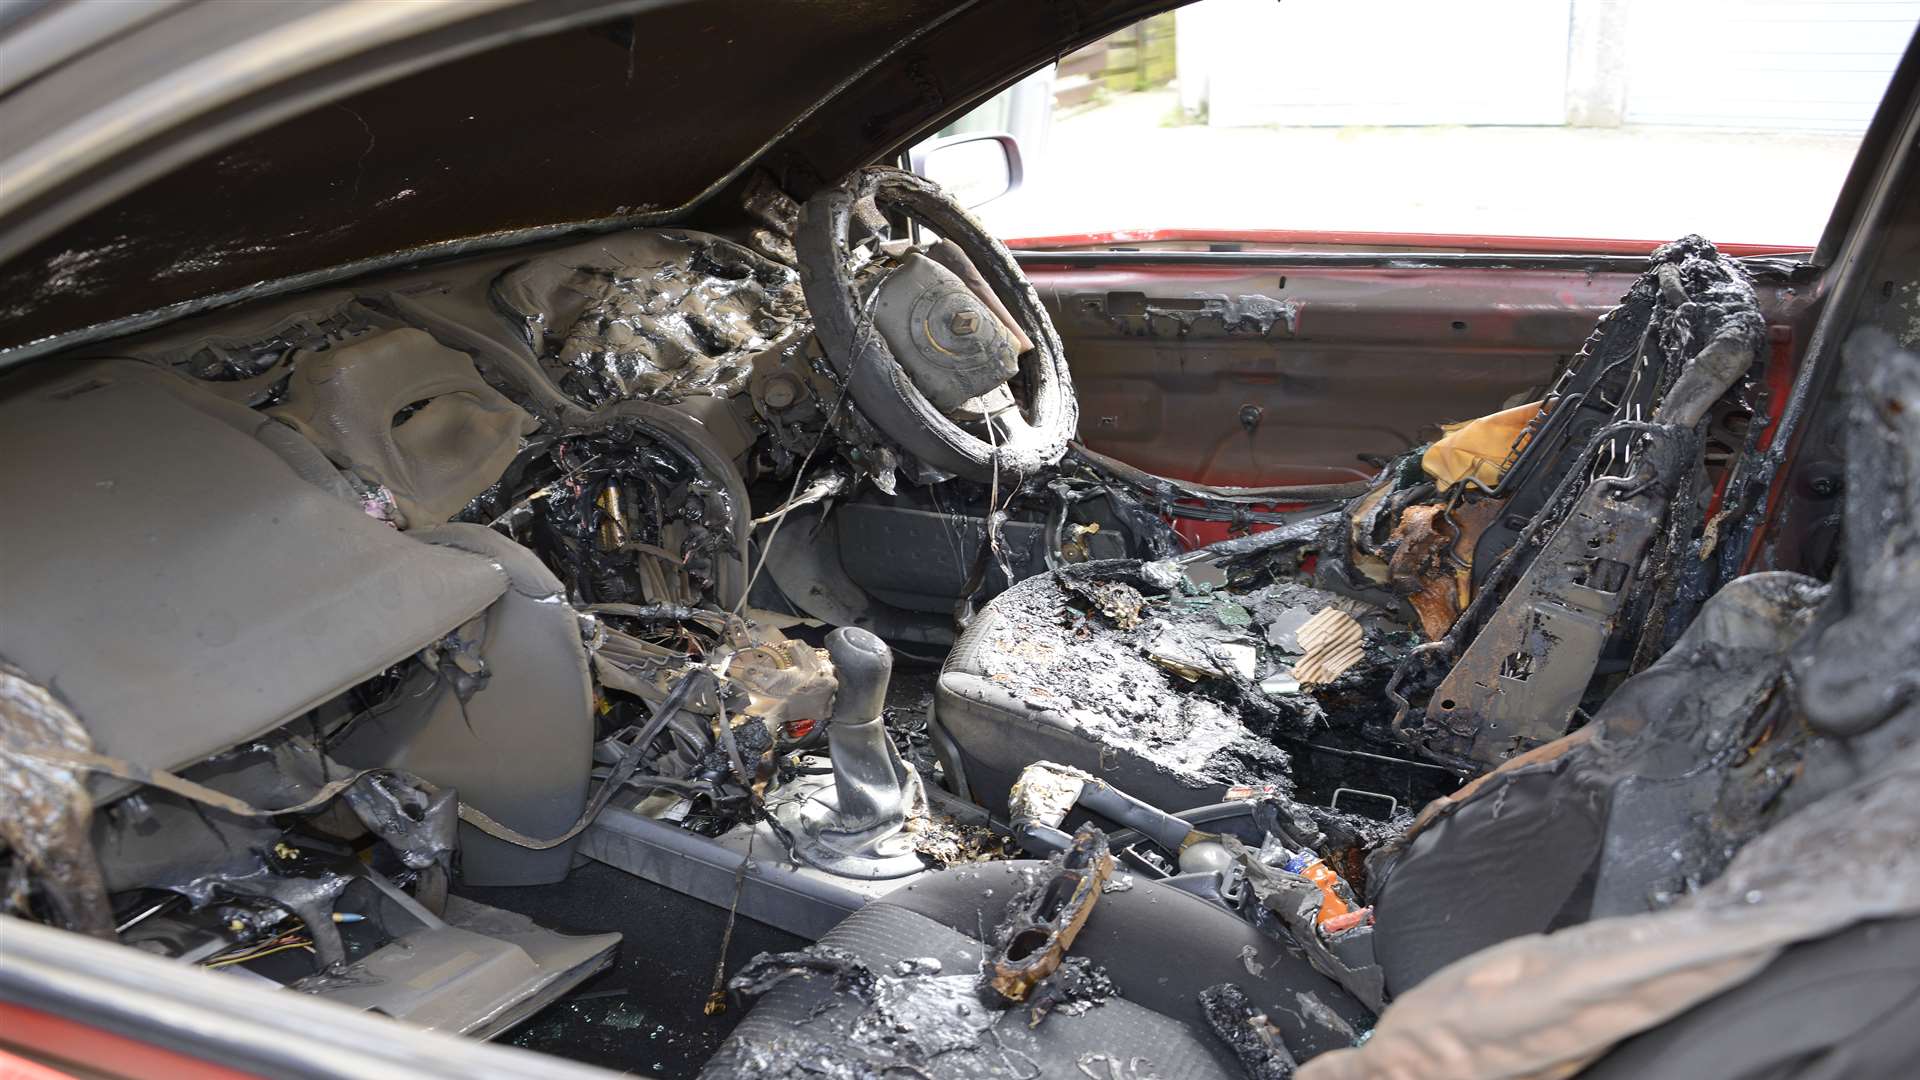 Gutted: Inside the burnt out car